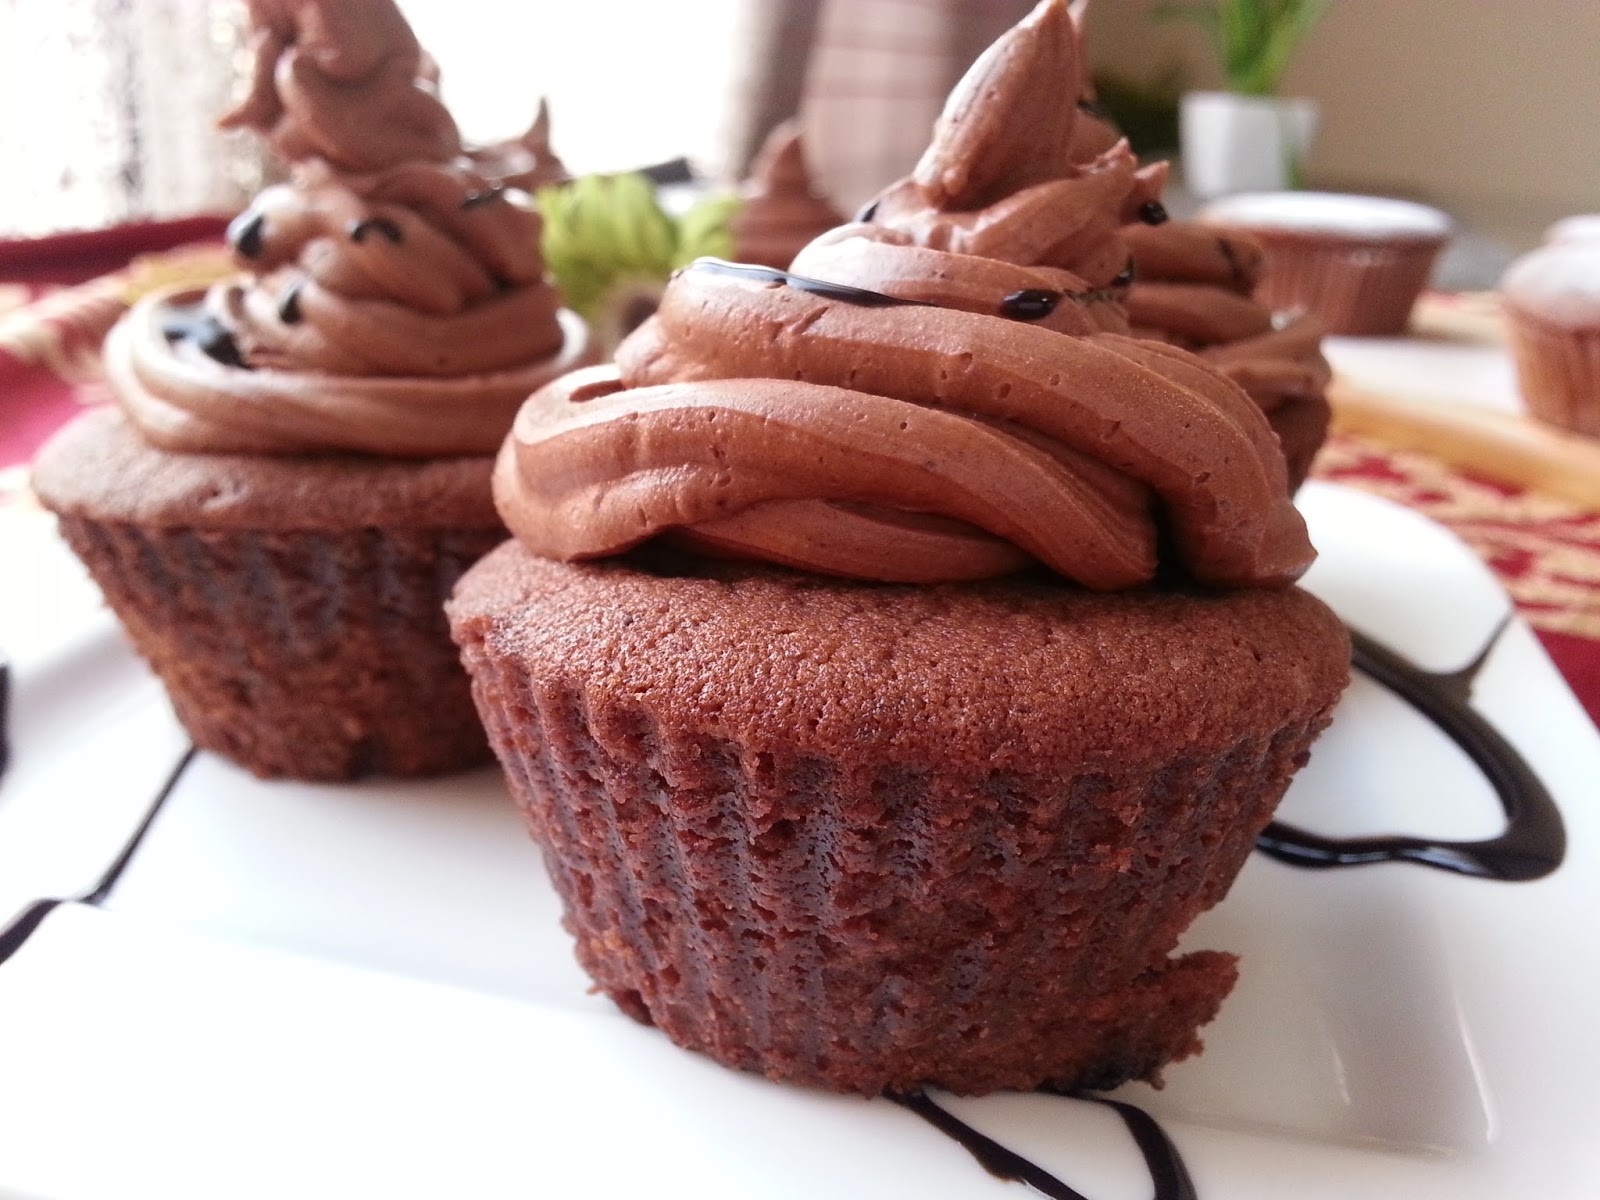 Cup Cake in Blender, Cup Cake Recipe Without Oven